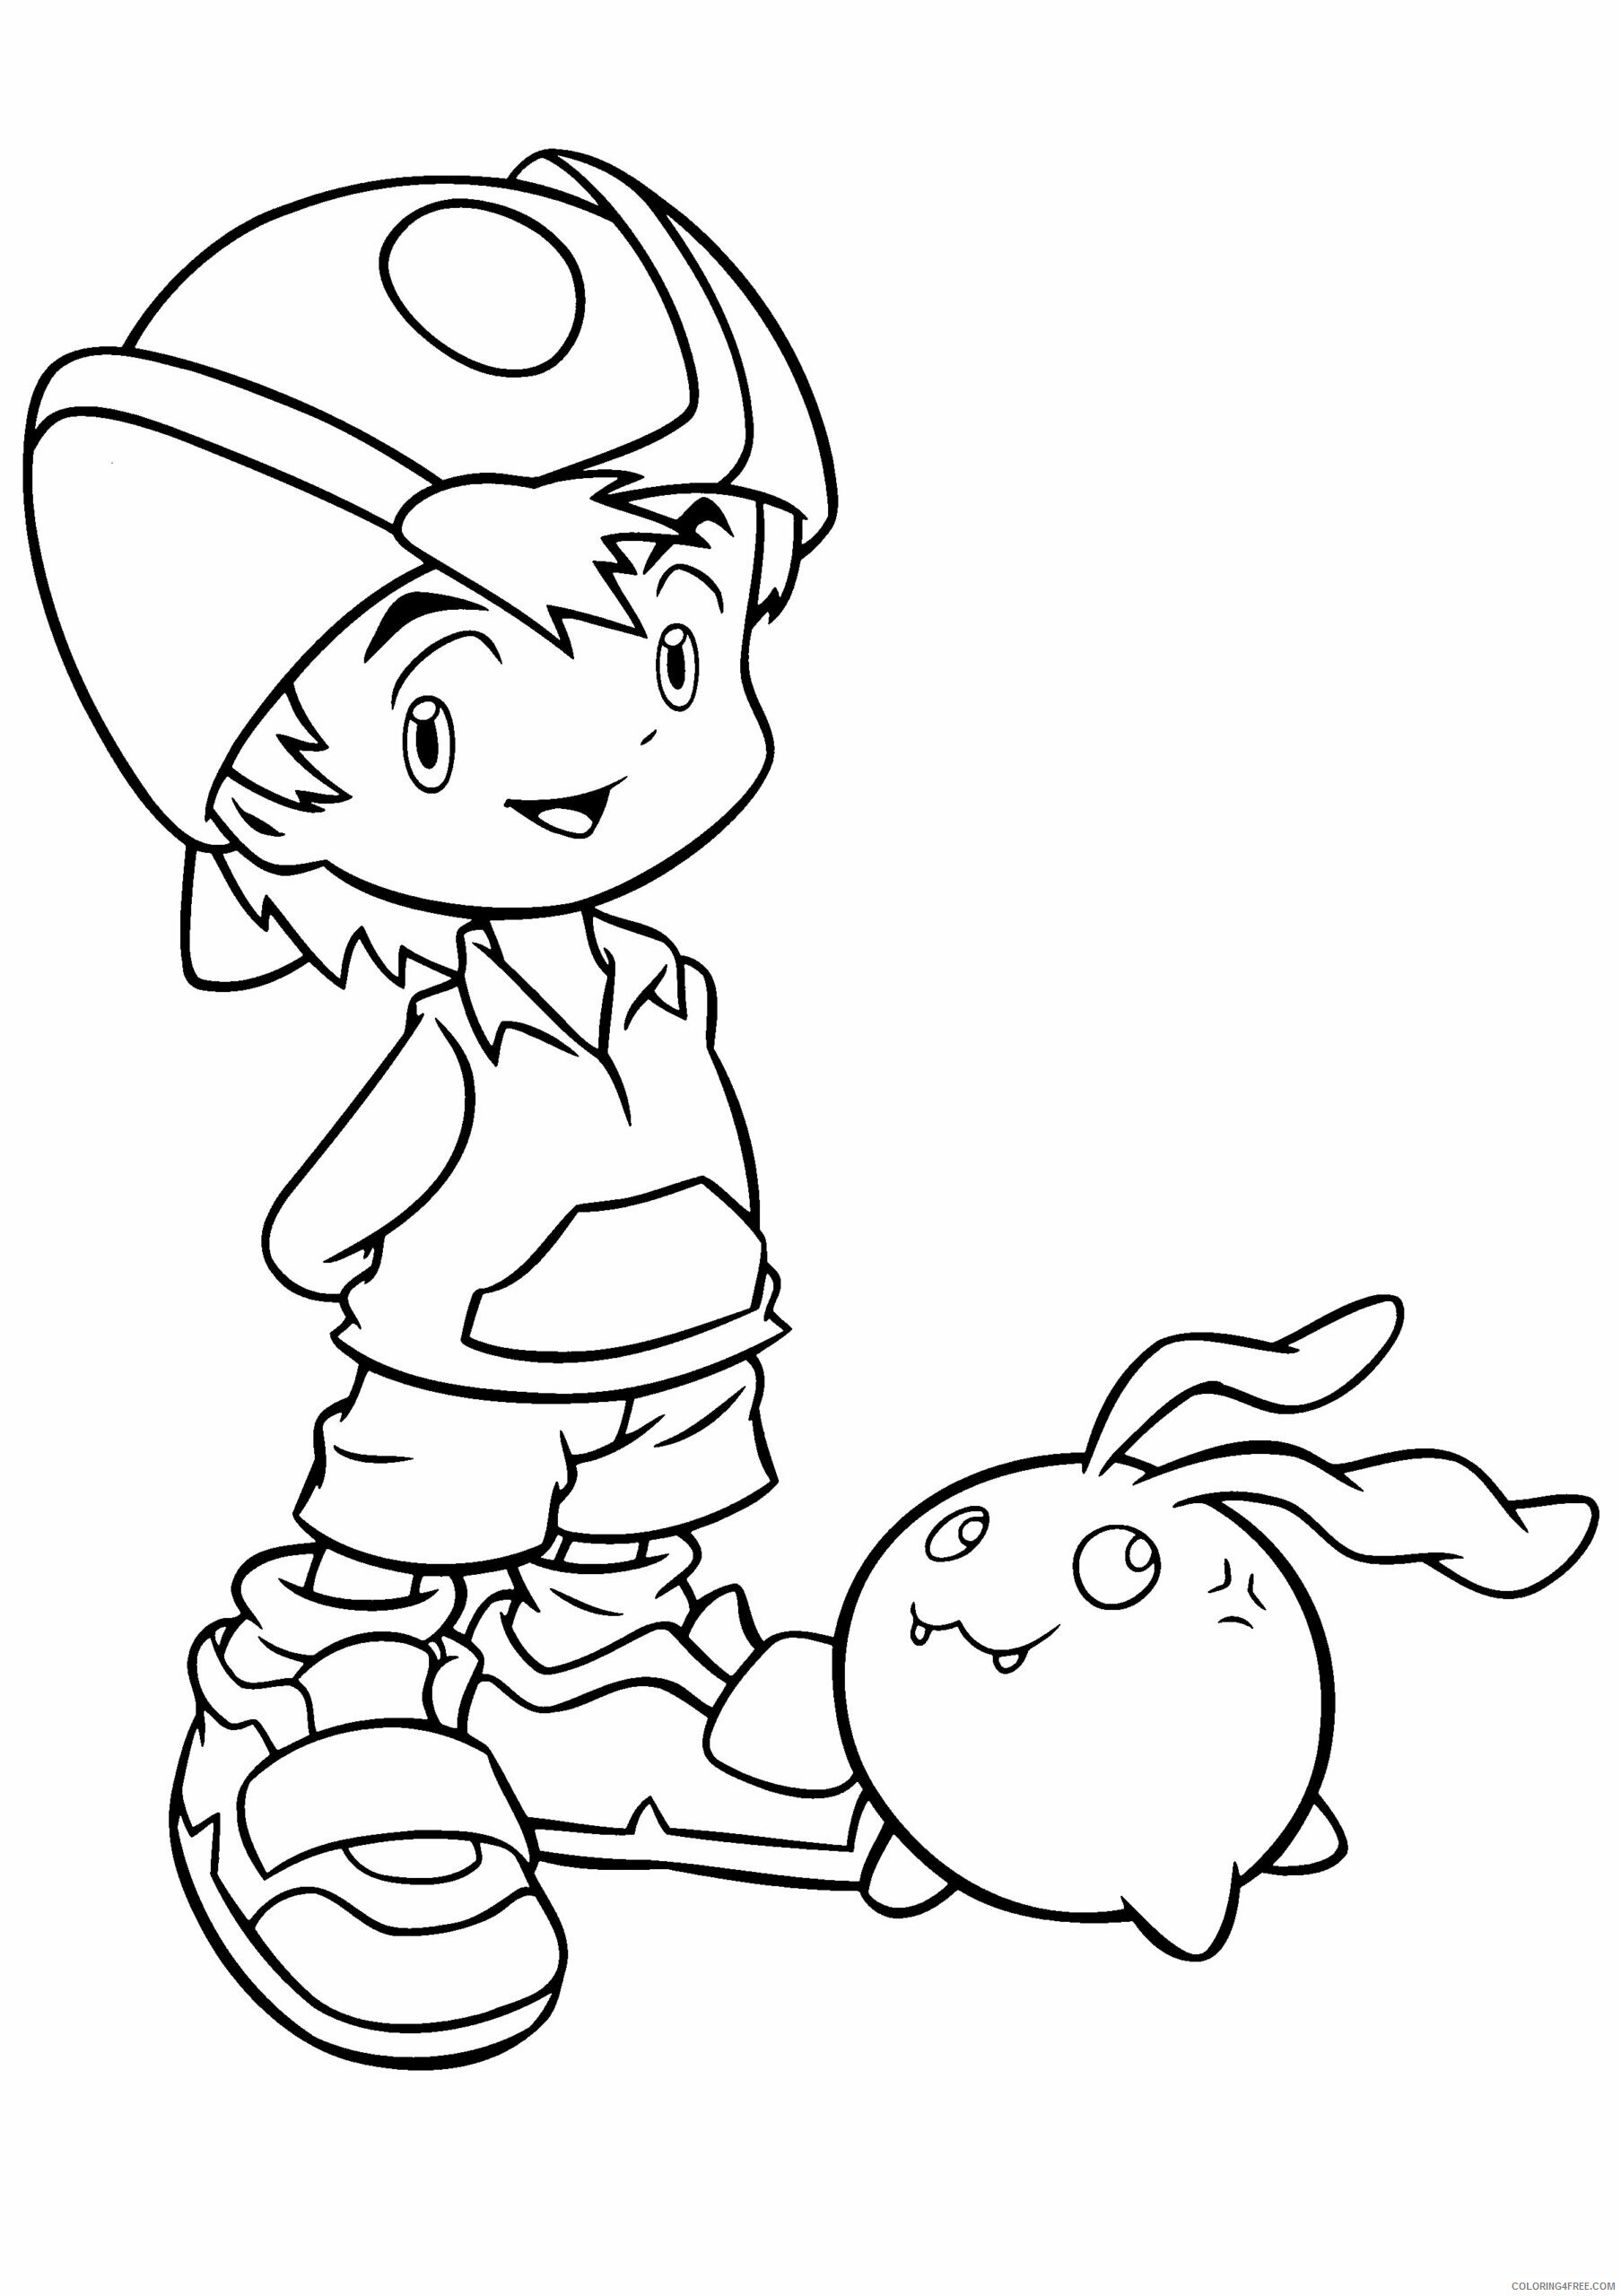 Digimon Printable Coloring Pages Anime digimon 119 2021 0226 Coloring4free